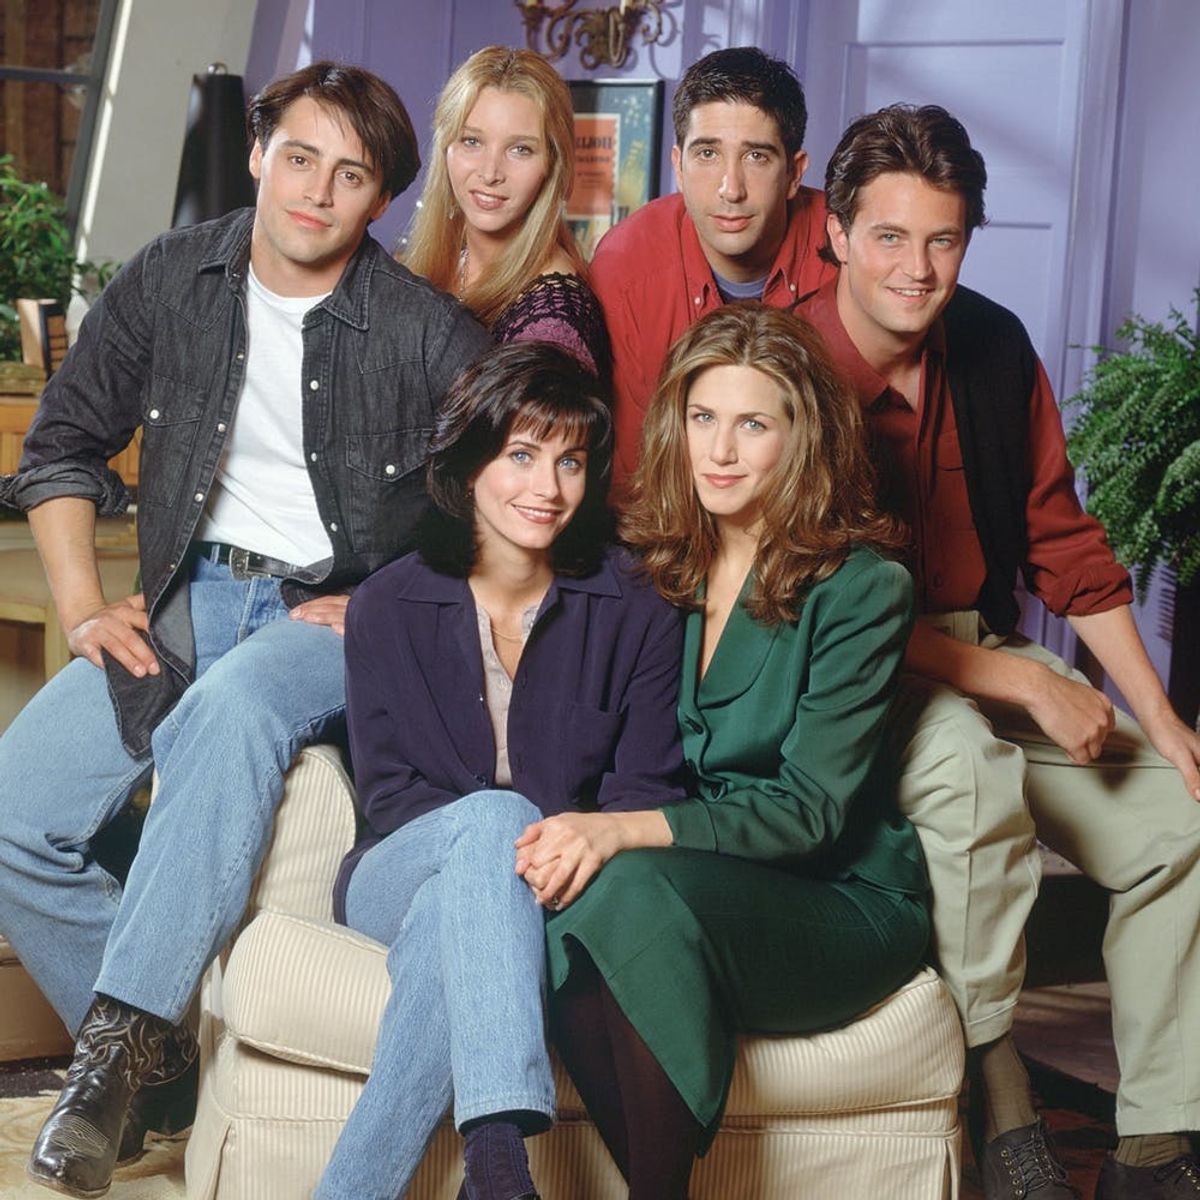 The ‘Friends’ Set Designer Says Not Everyone Was on Board With That Purple Apartment Hue